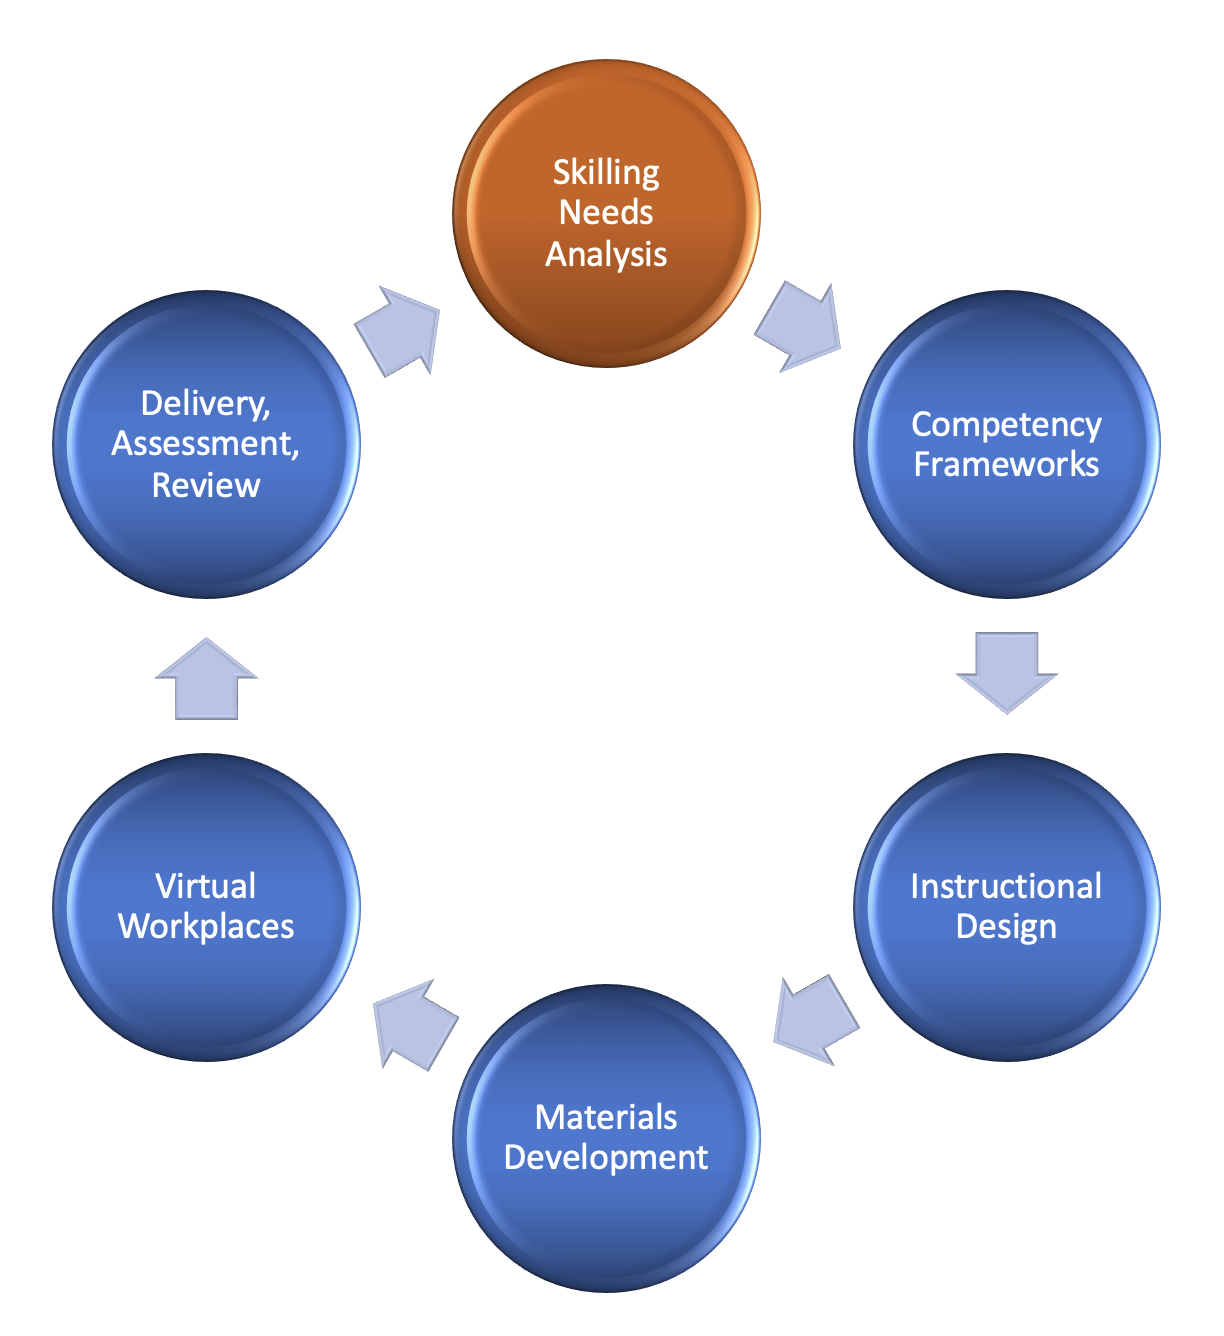 Skilling Needs Analysis Competency Frameworks Instructional Design Materials Development Virtual Workplaces Delivery Assessment Review